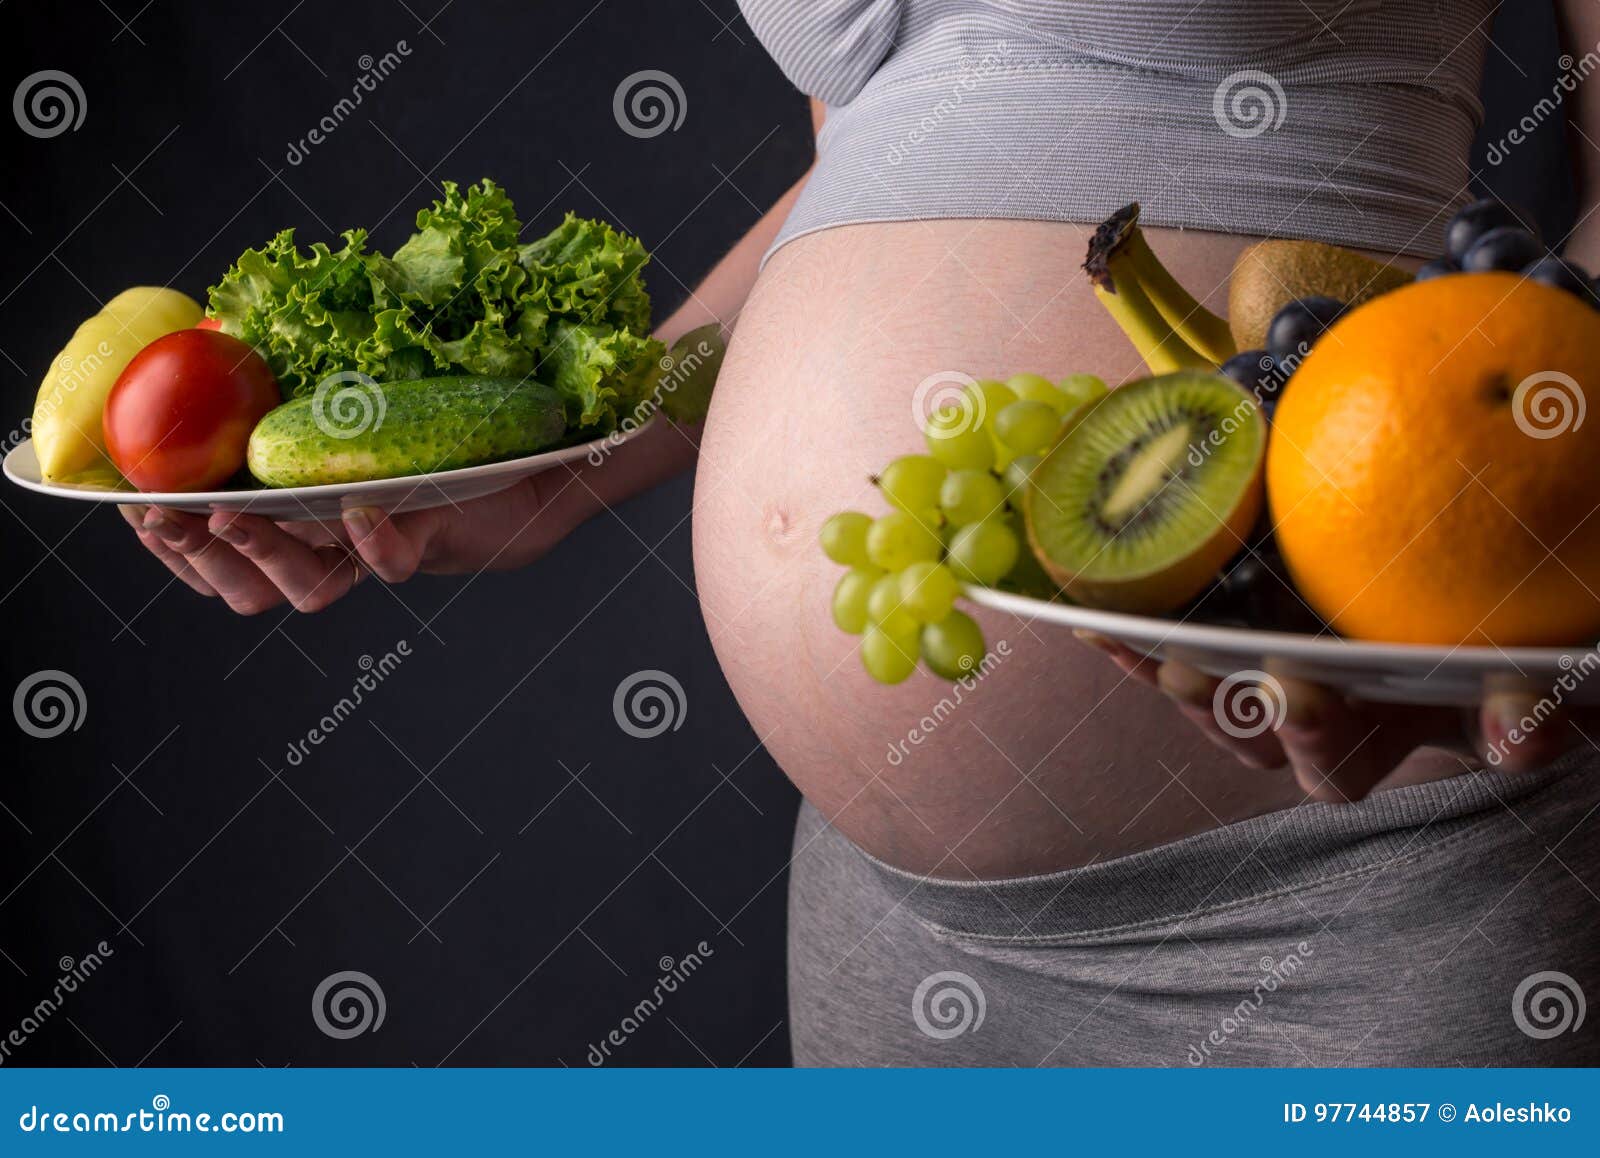 Pregnant Woman With Belly Holding A Plate With Fruits And ...